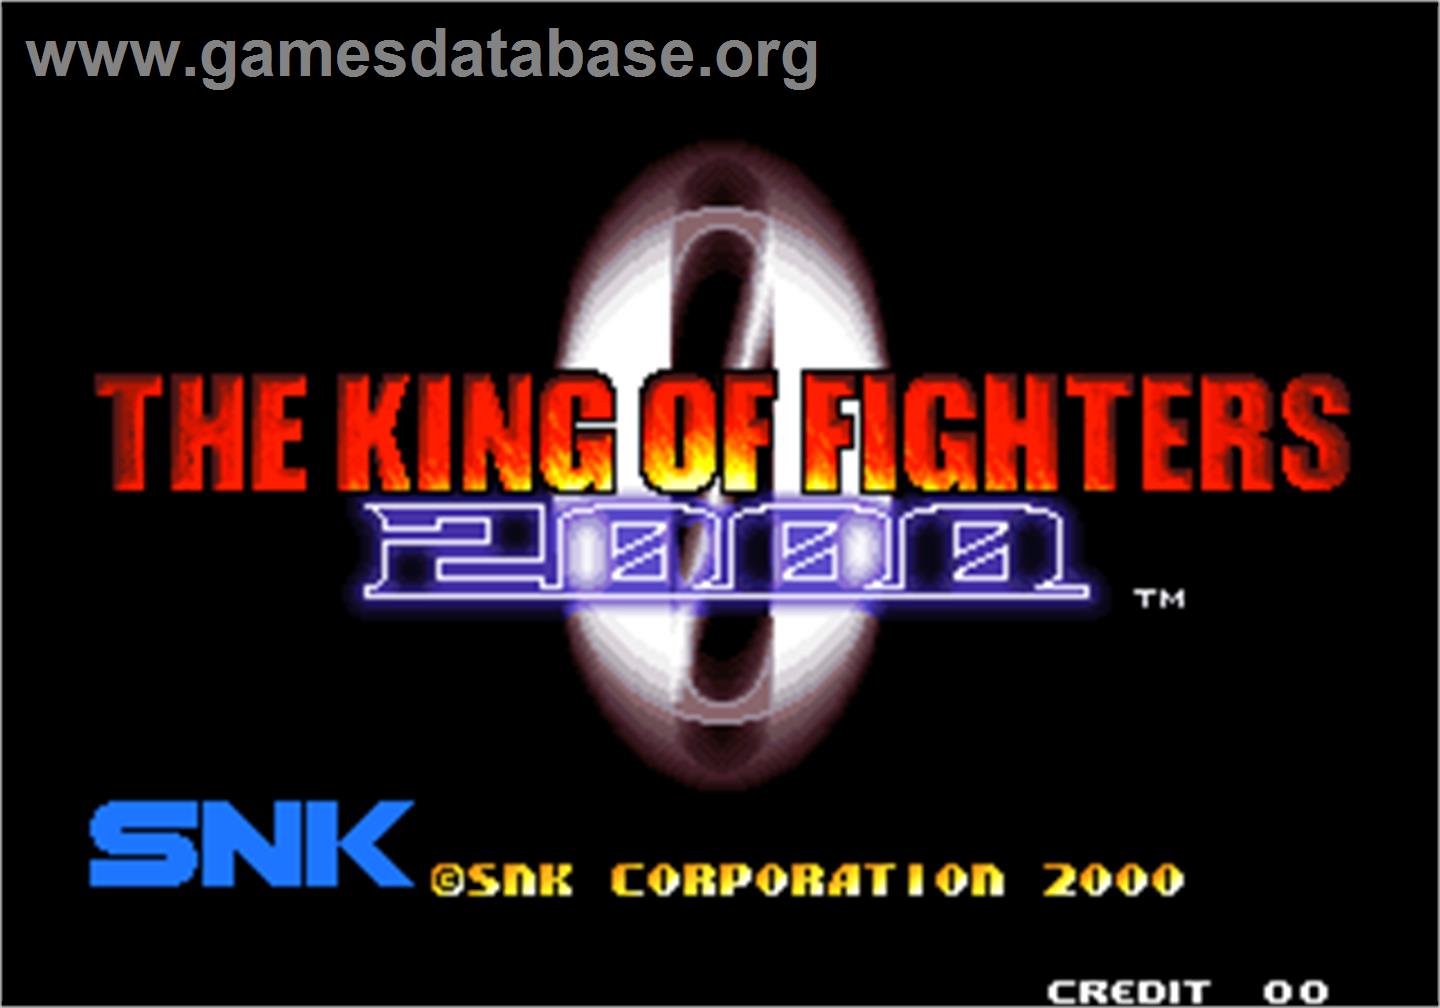 The King of Fighters 2000 - Arcade - Artwork - Title Screen